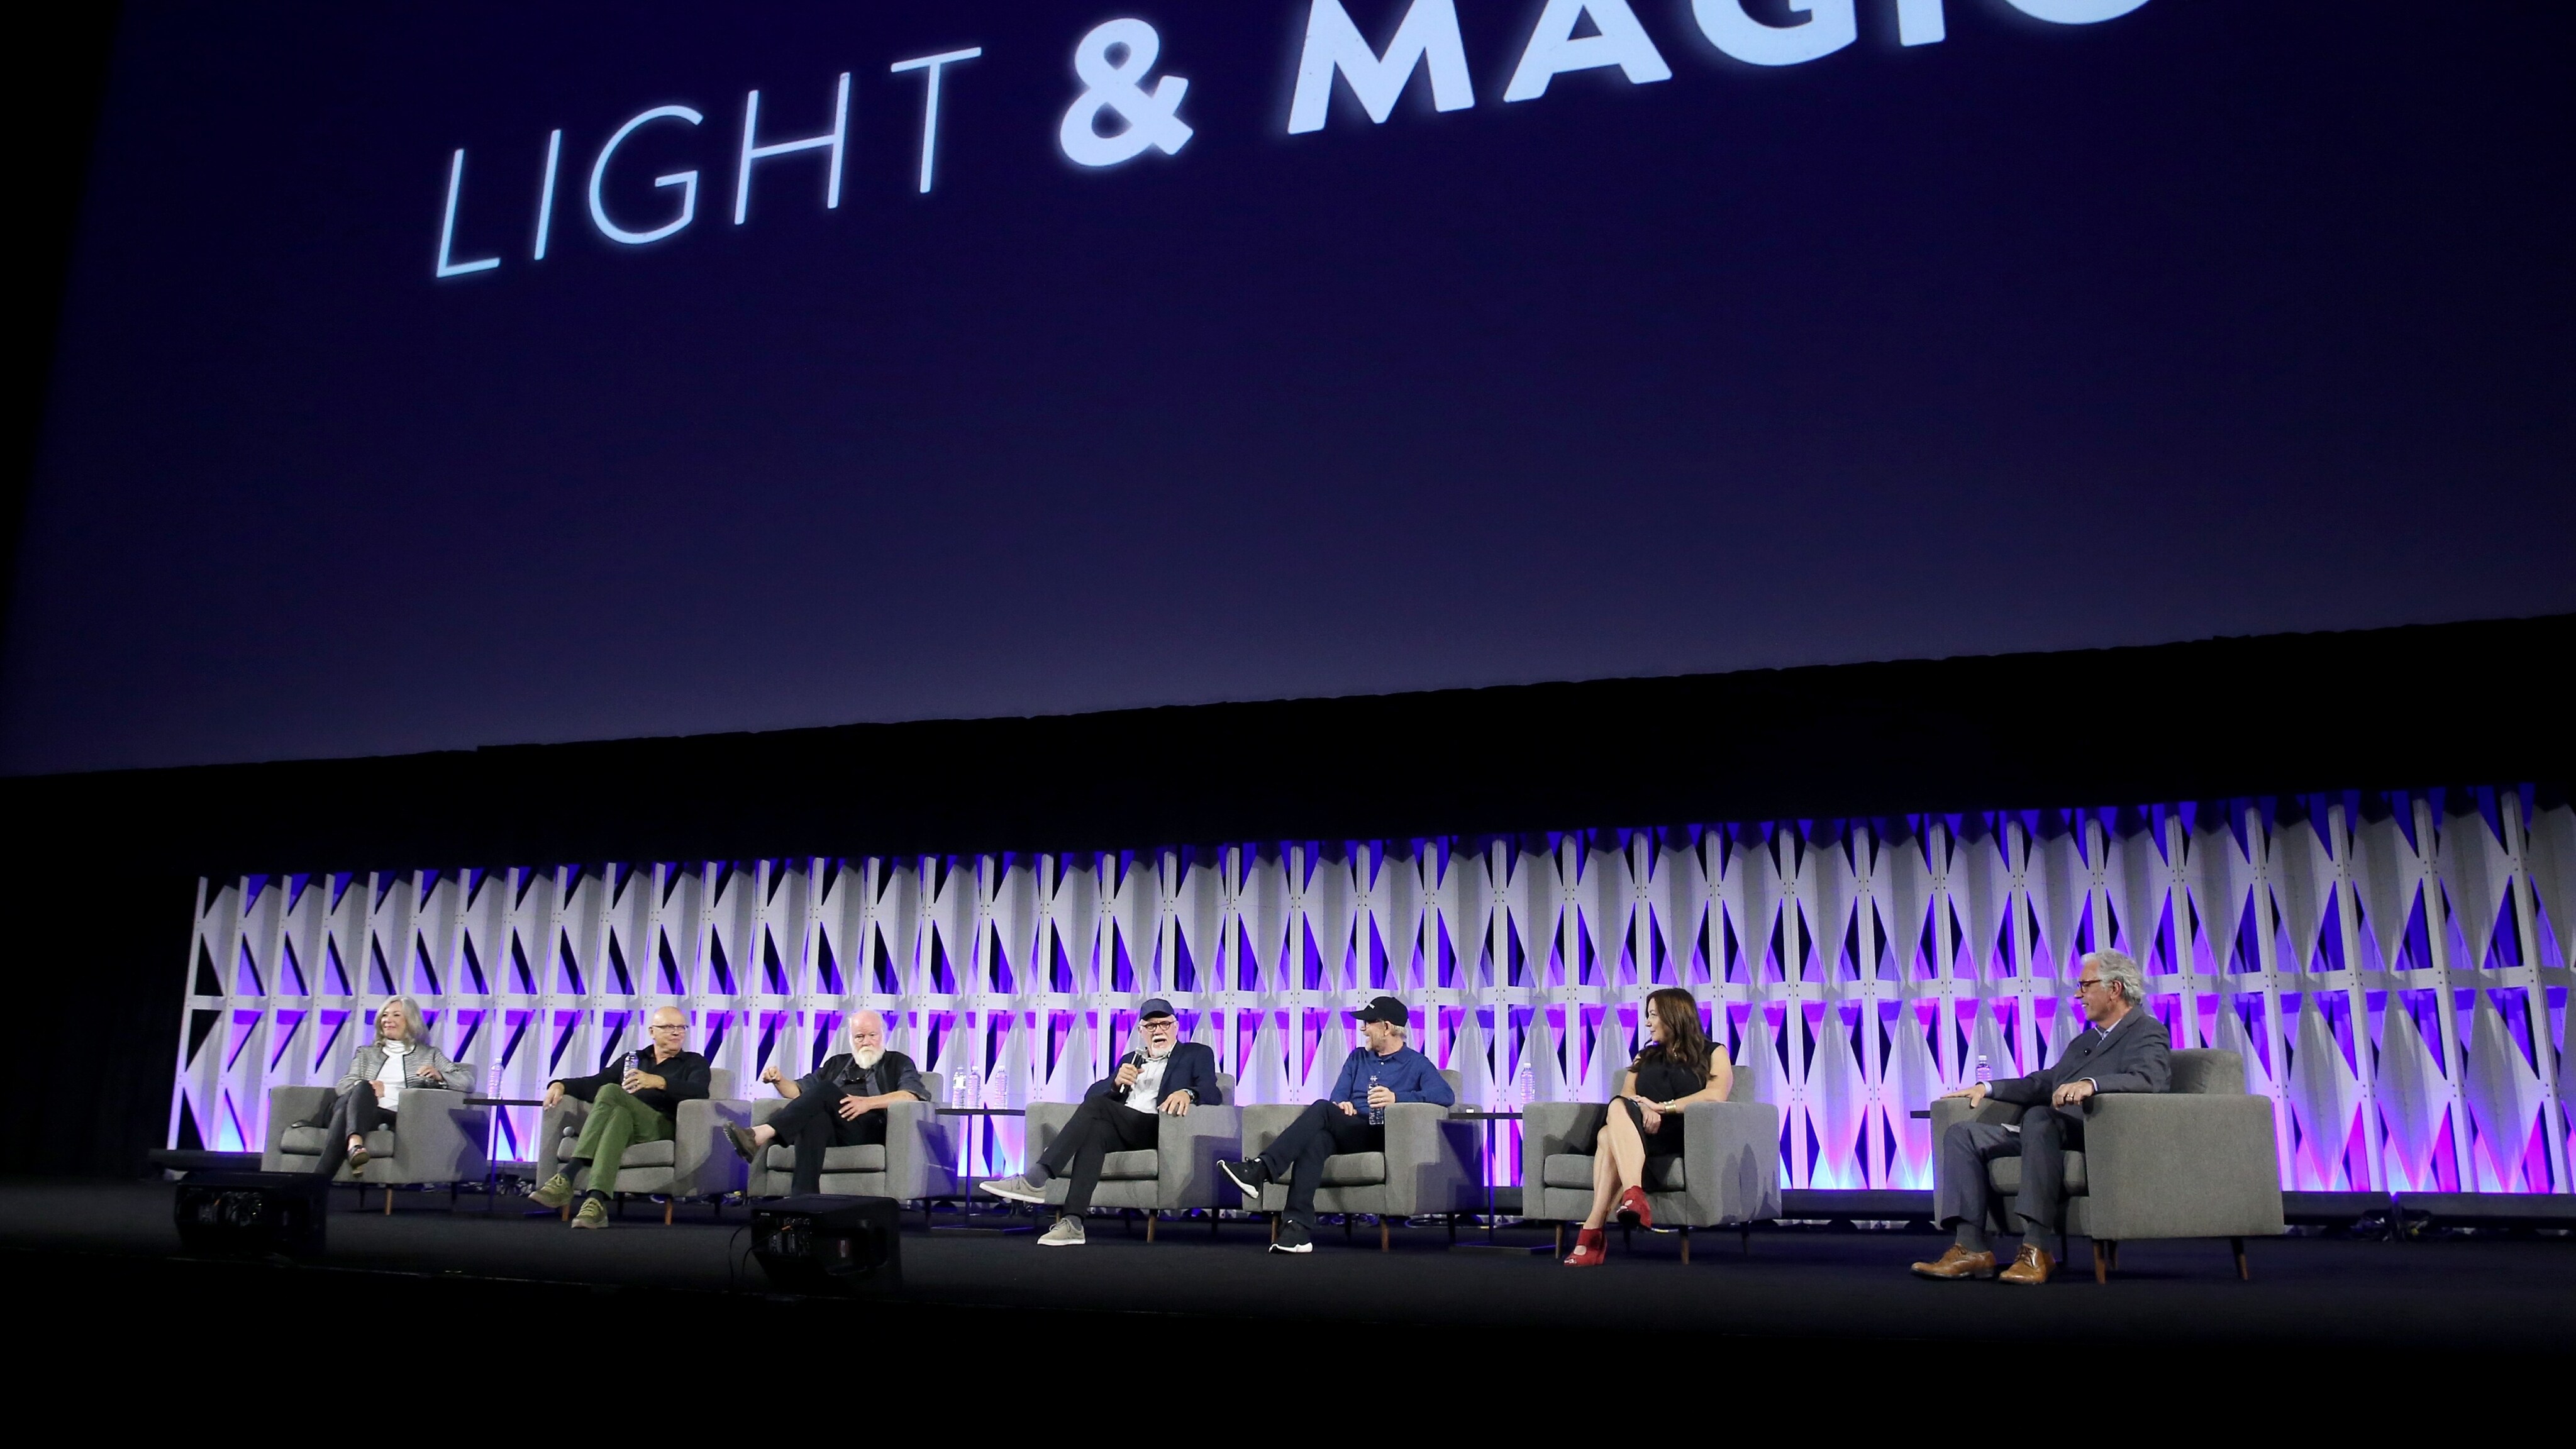 Disney+ Releases Photos From “Light & Magic” Star Wars Celebration Panel